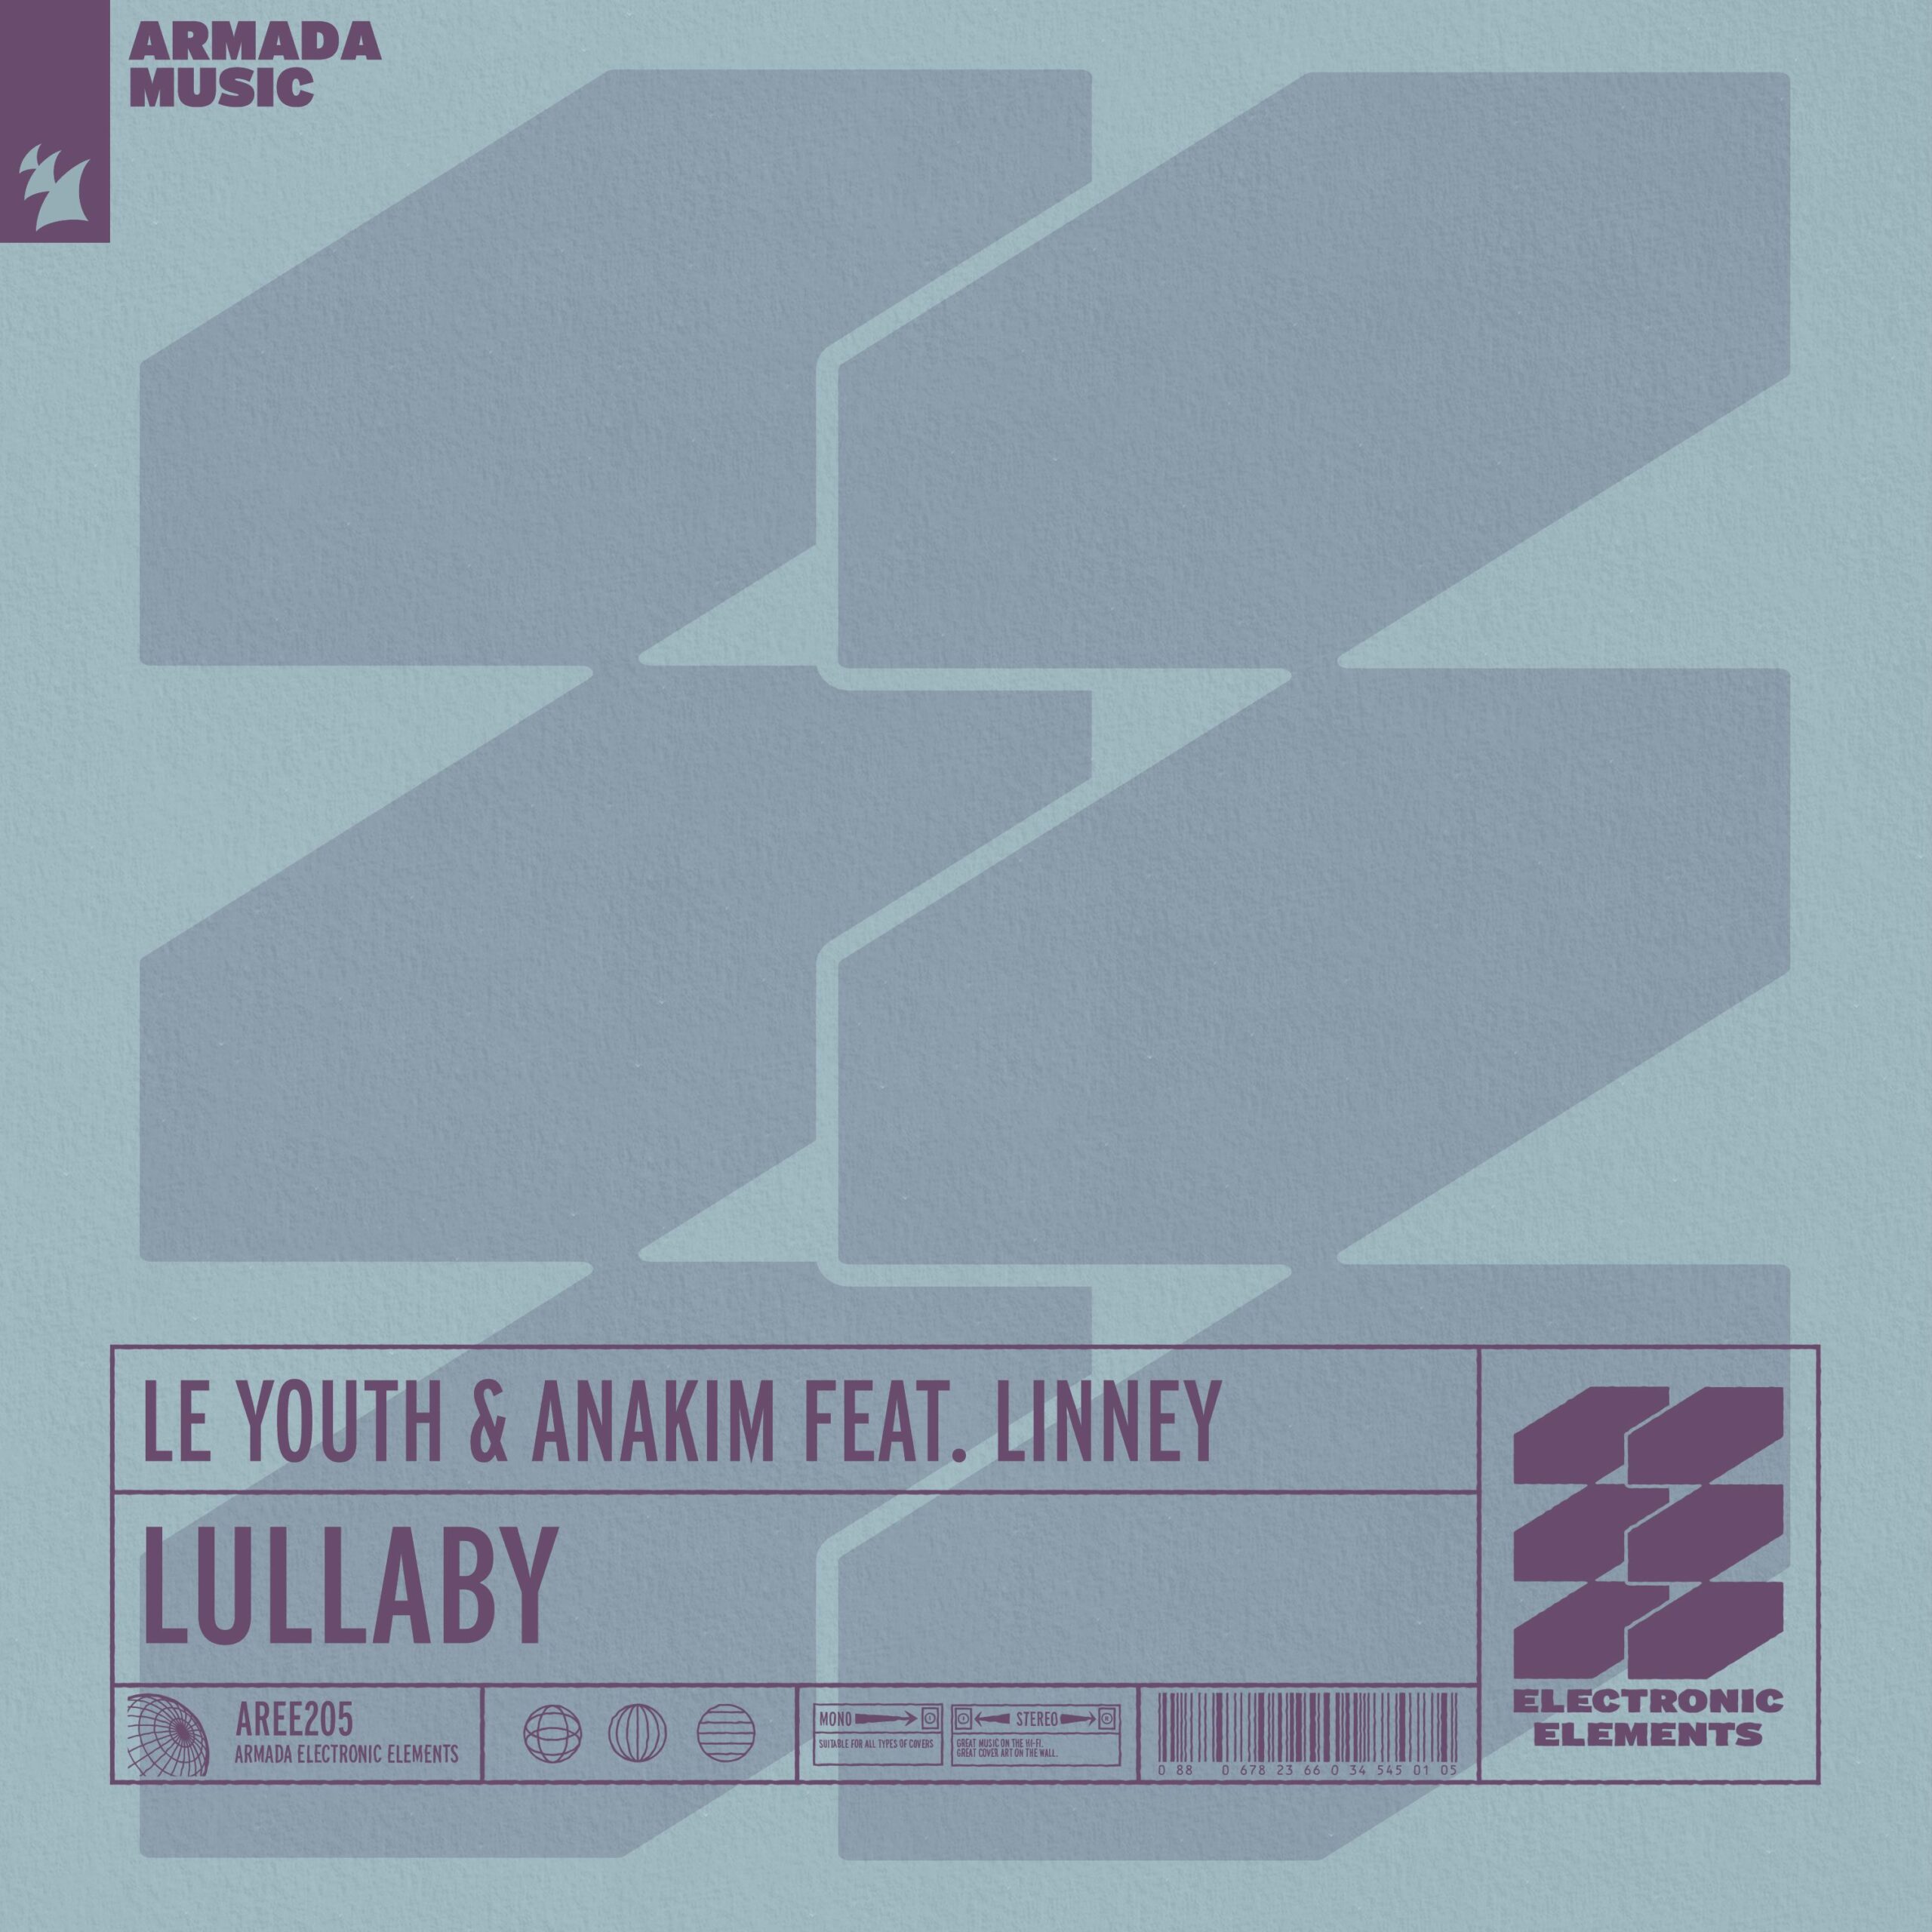 Le Youth and Anakim feat. Linney presents Lullaby on Armada Music